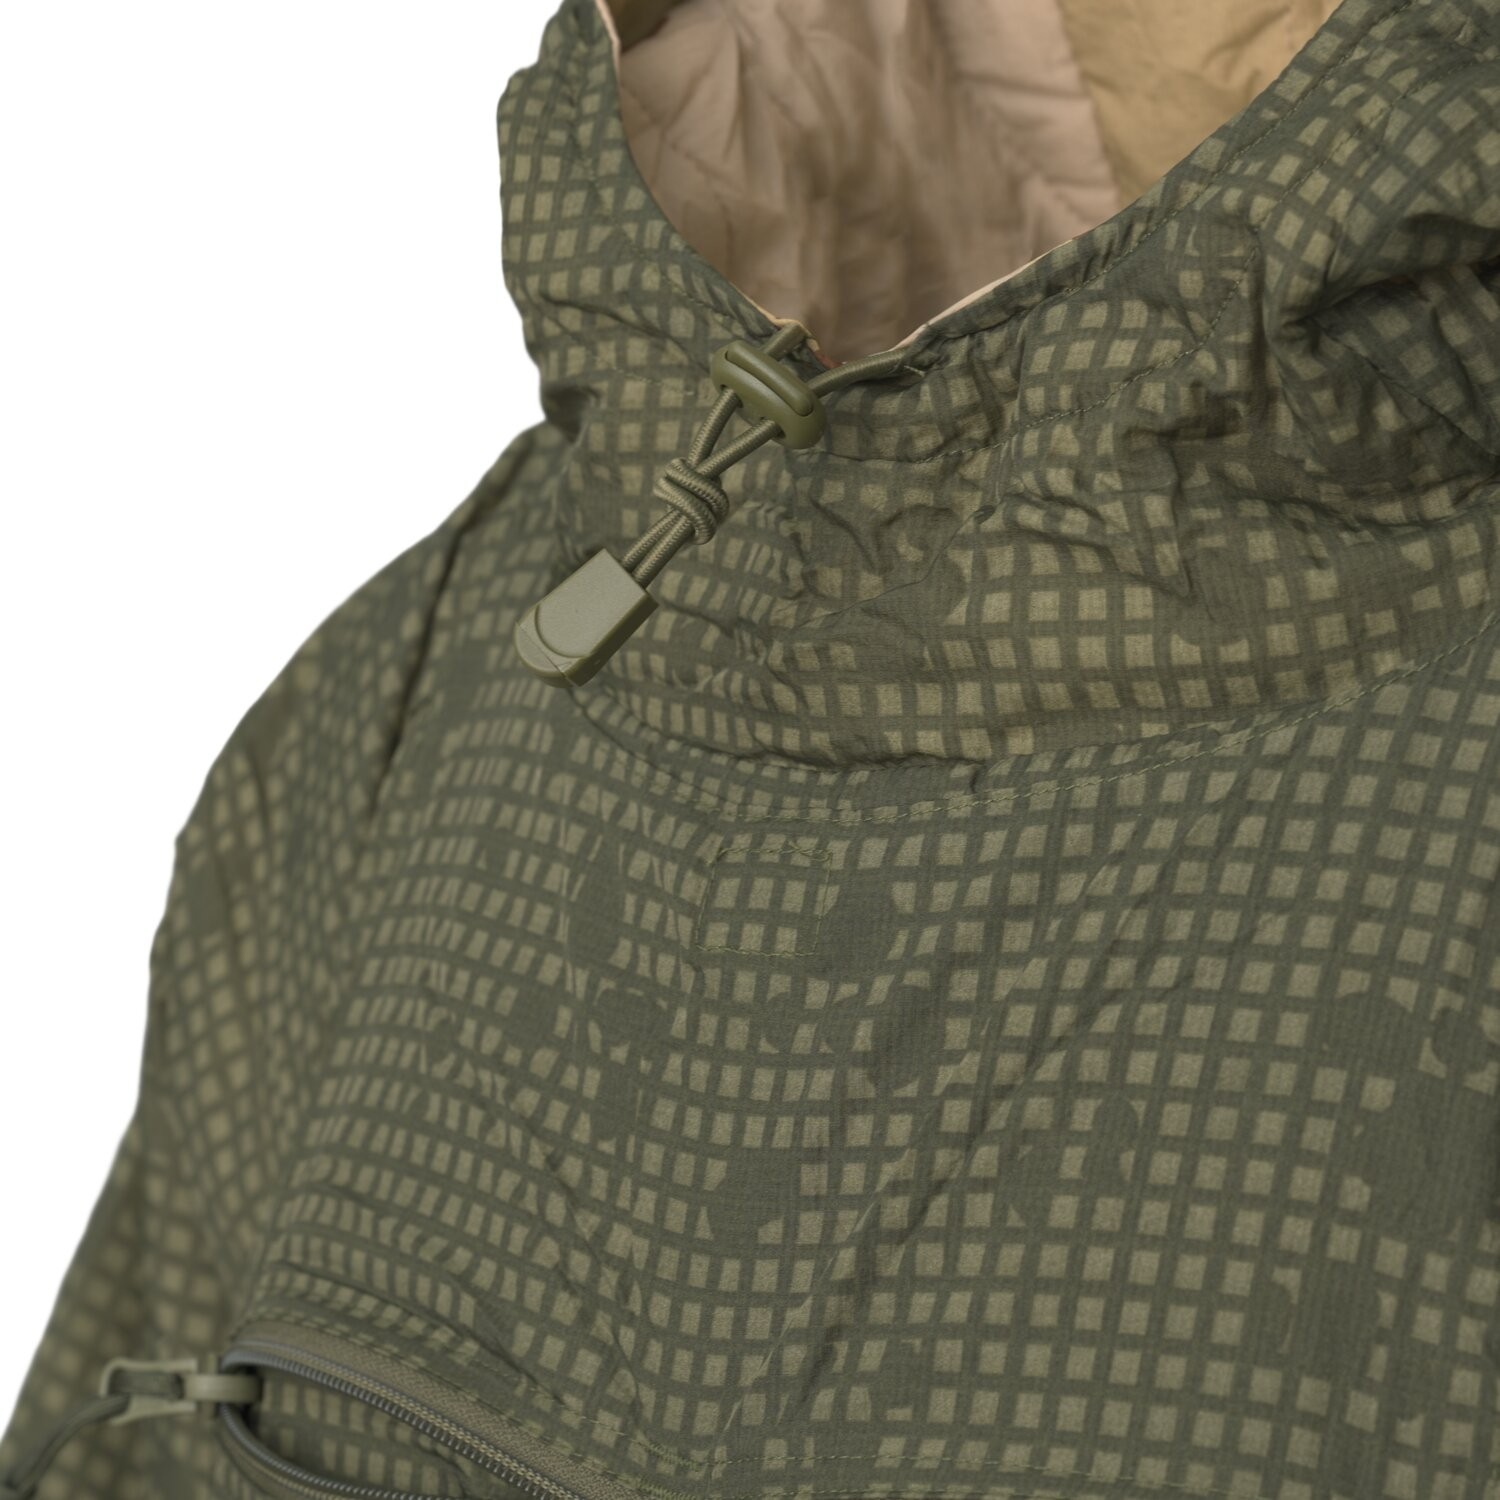 Helikon-Tex Reversible Swagman Roll Mitchell Camo Leaf/Mitchell Camo Clouds